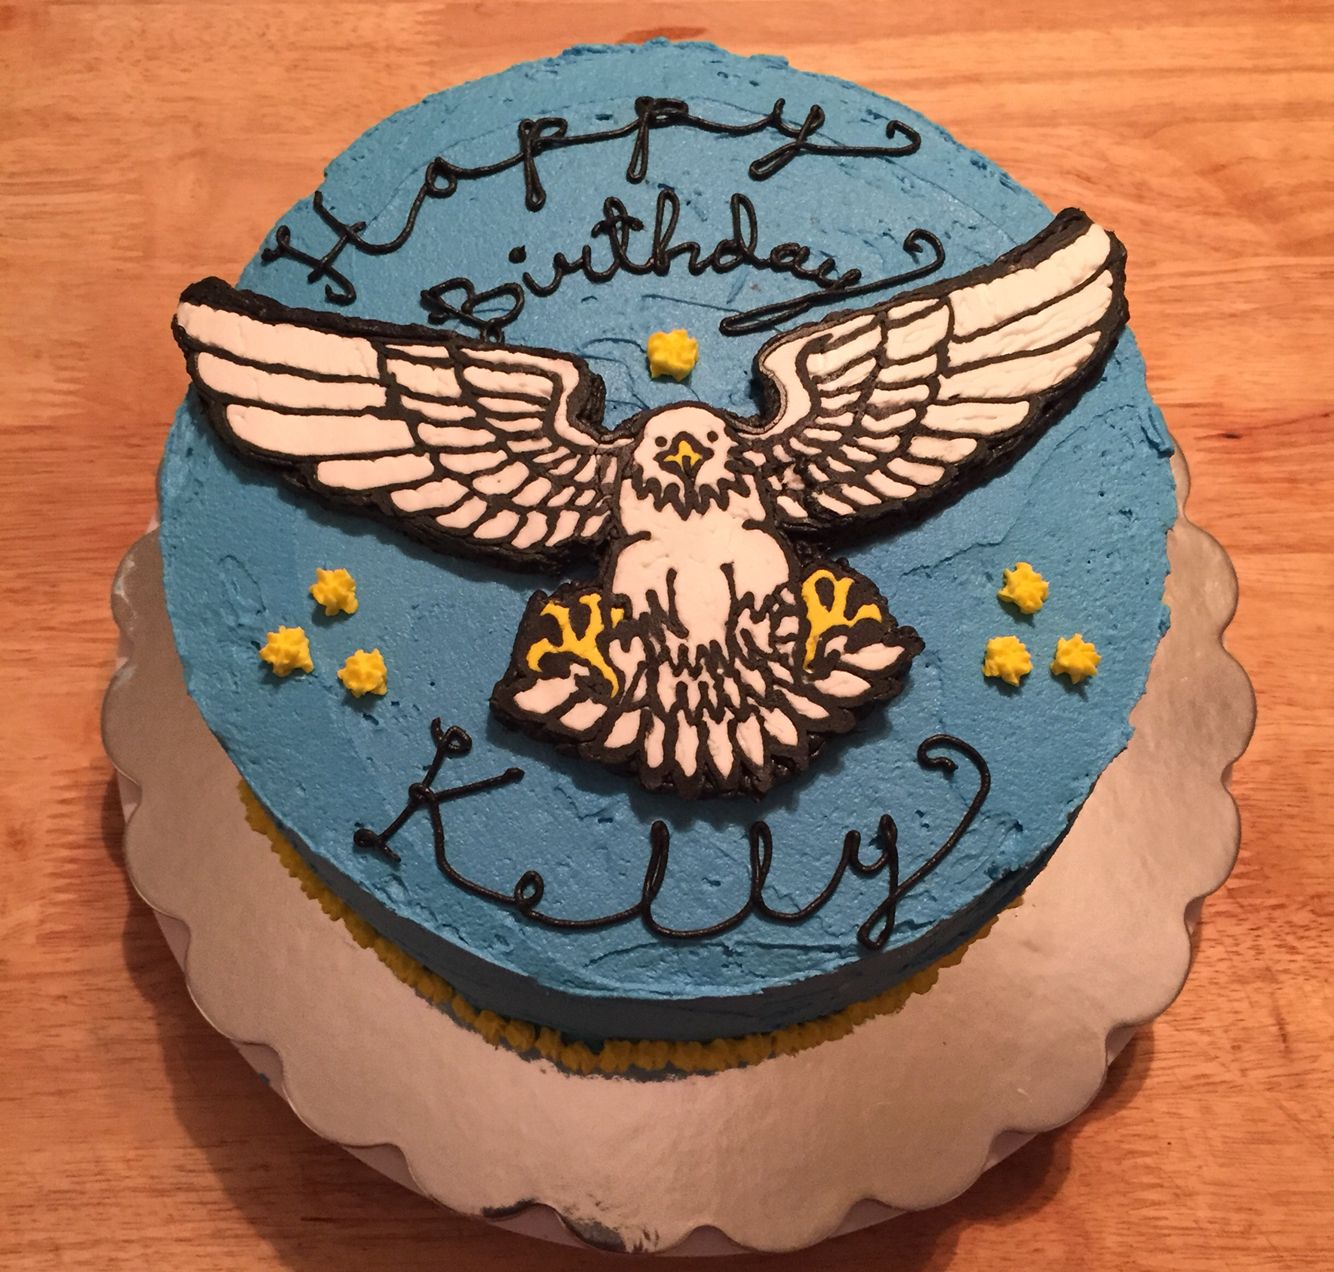 Bake a wish delivery for July 2015. 3 layer chocolate cake with blue ...